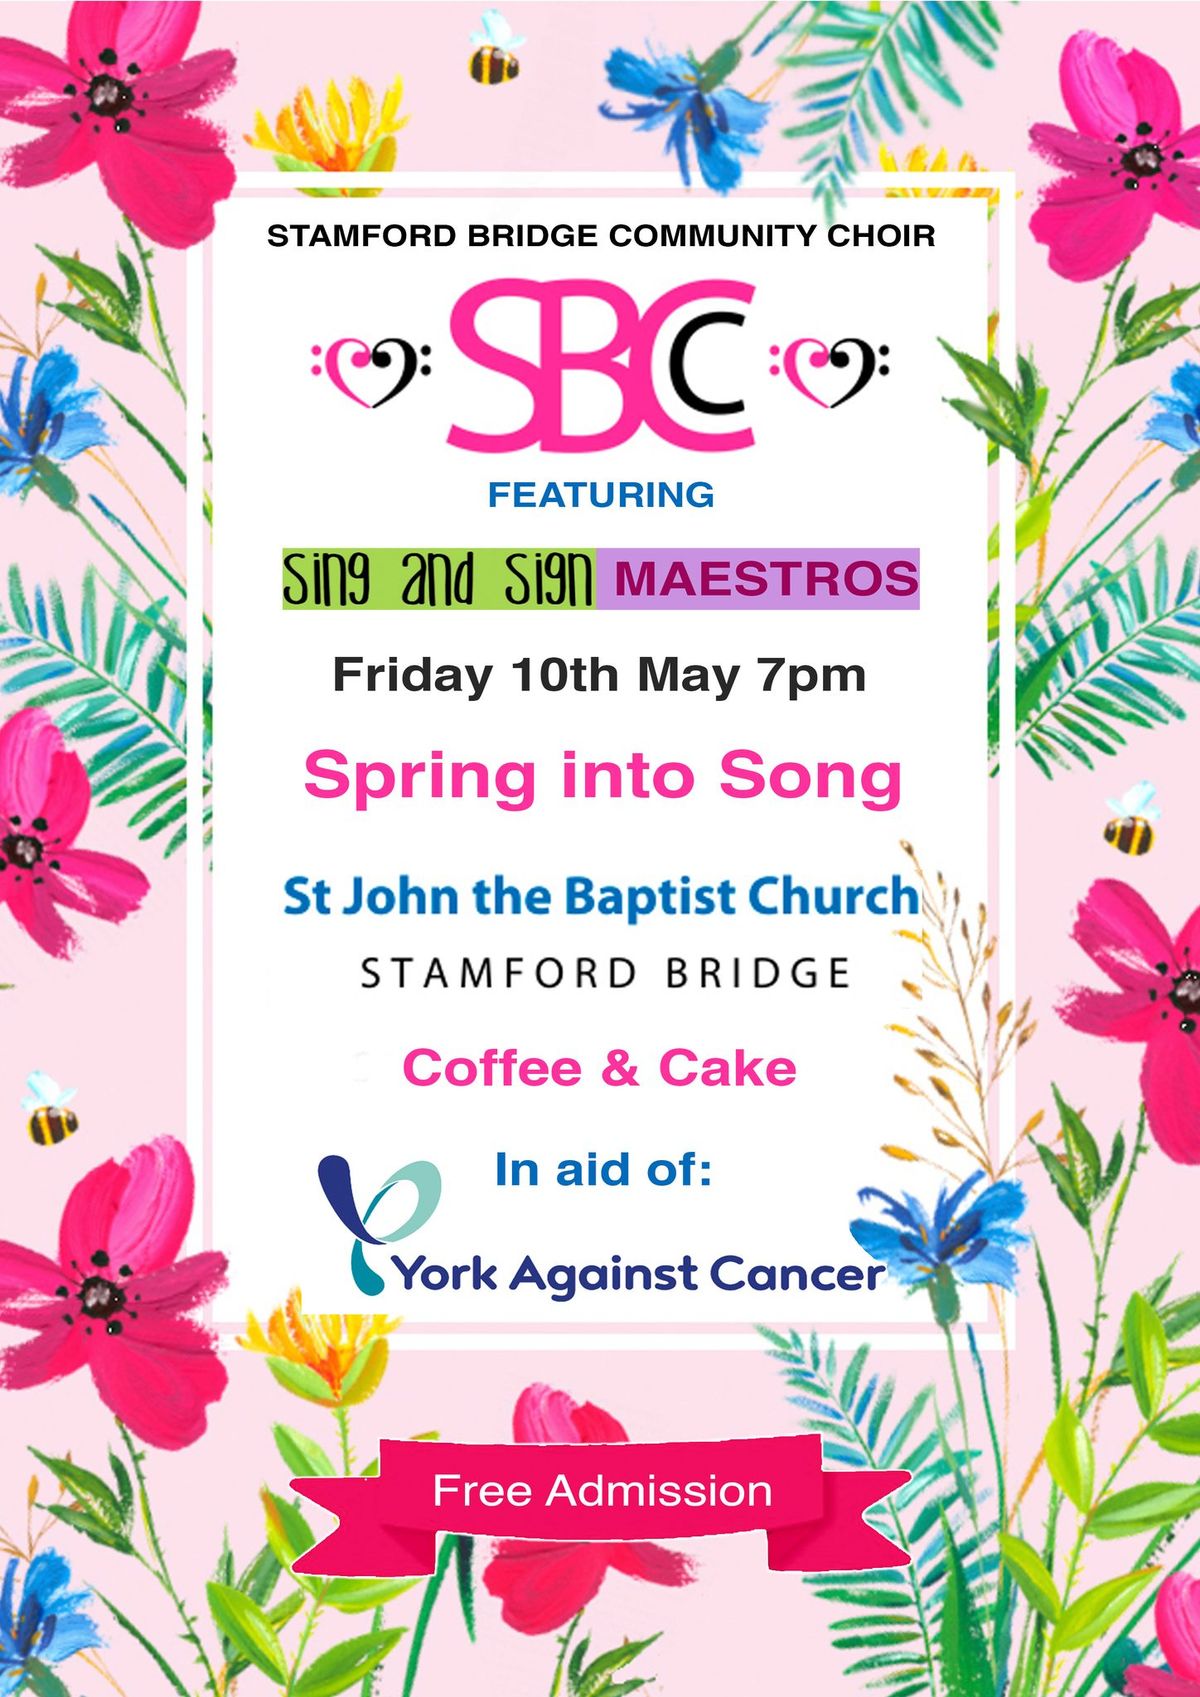 Spring into Song - Stamford Bridge Community Choir featuring the Sing & Sign Maestros